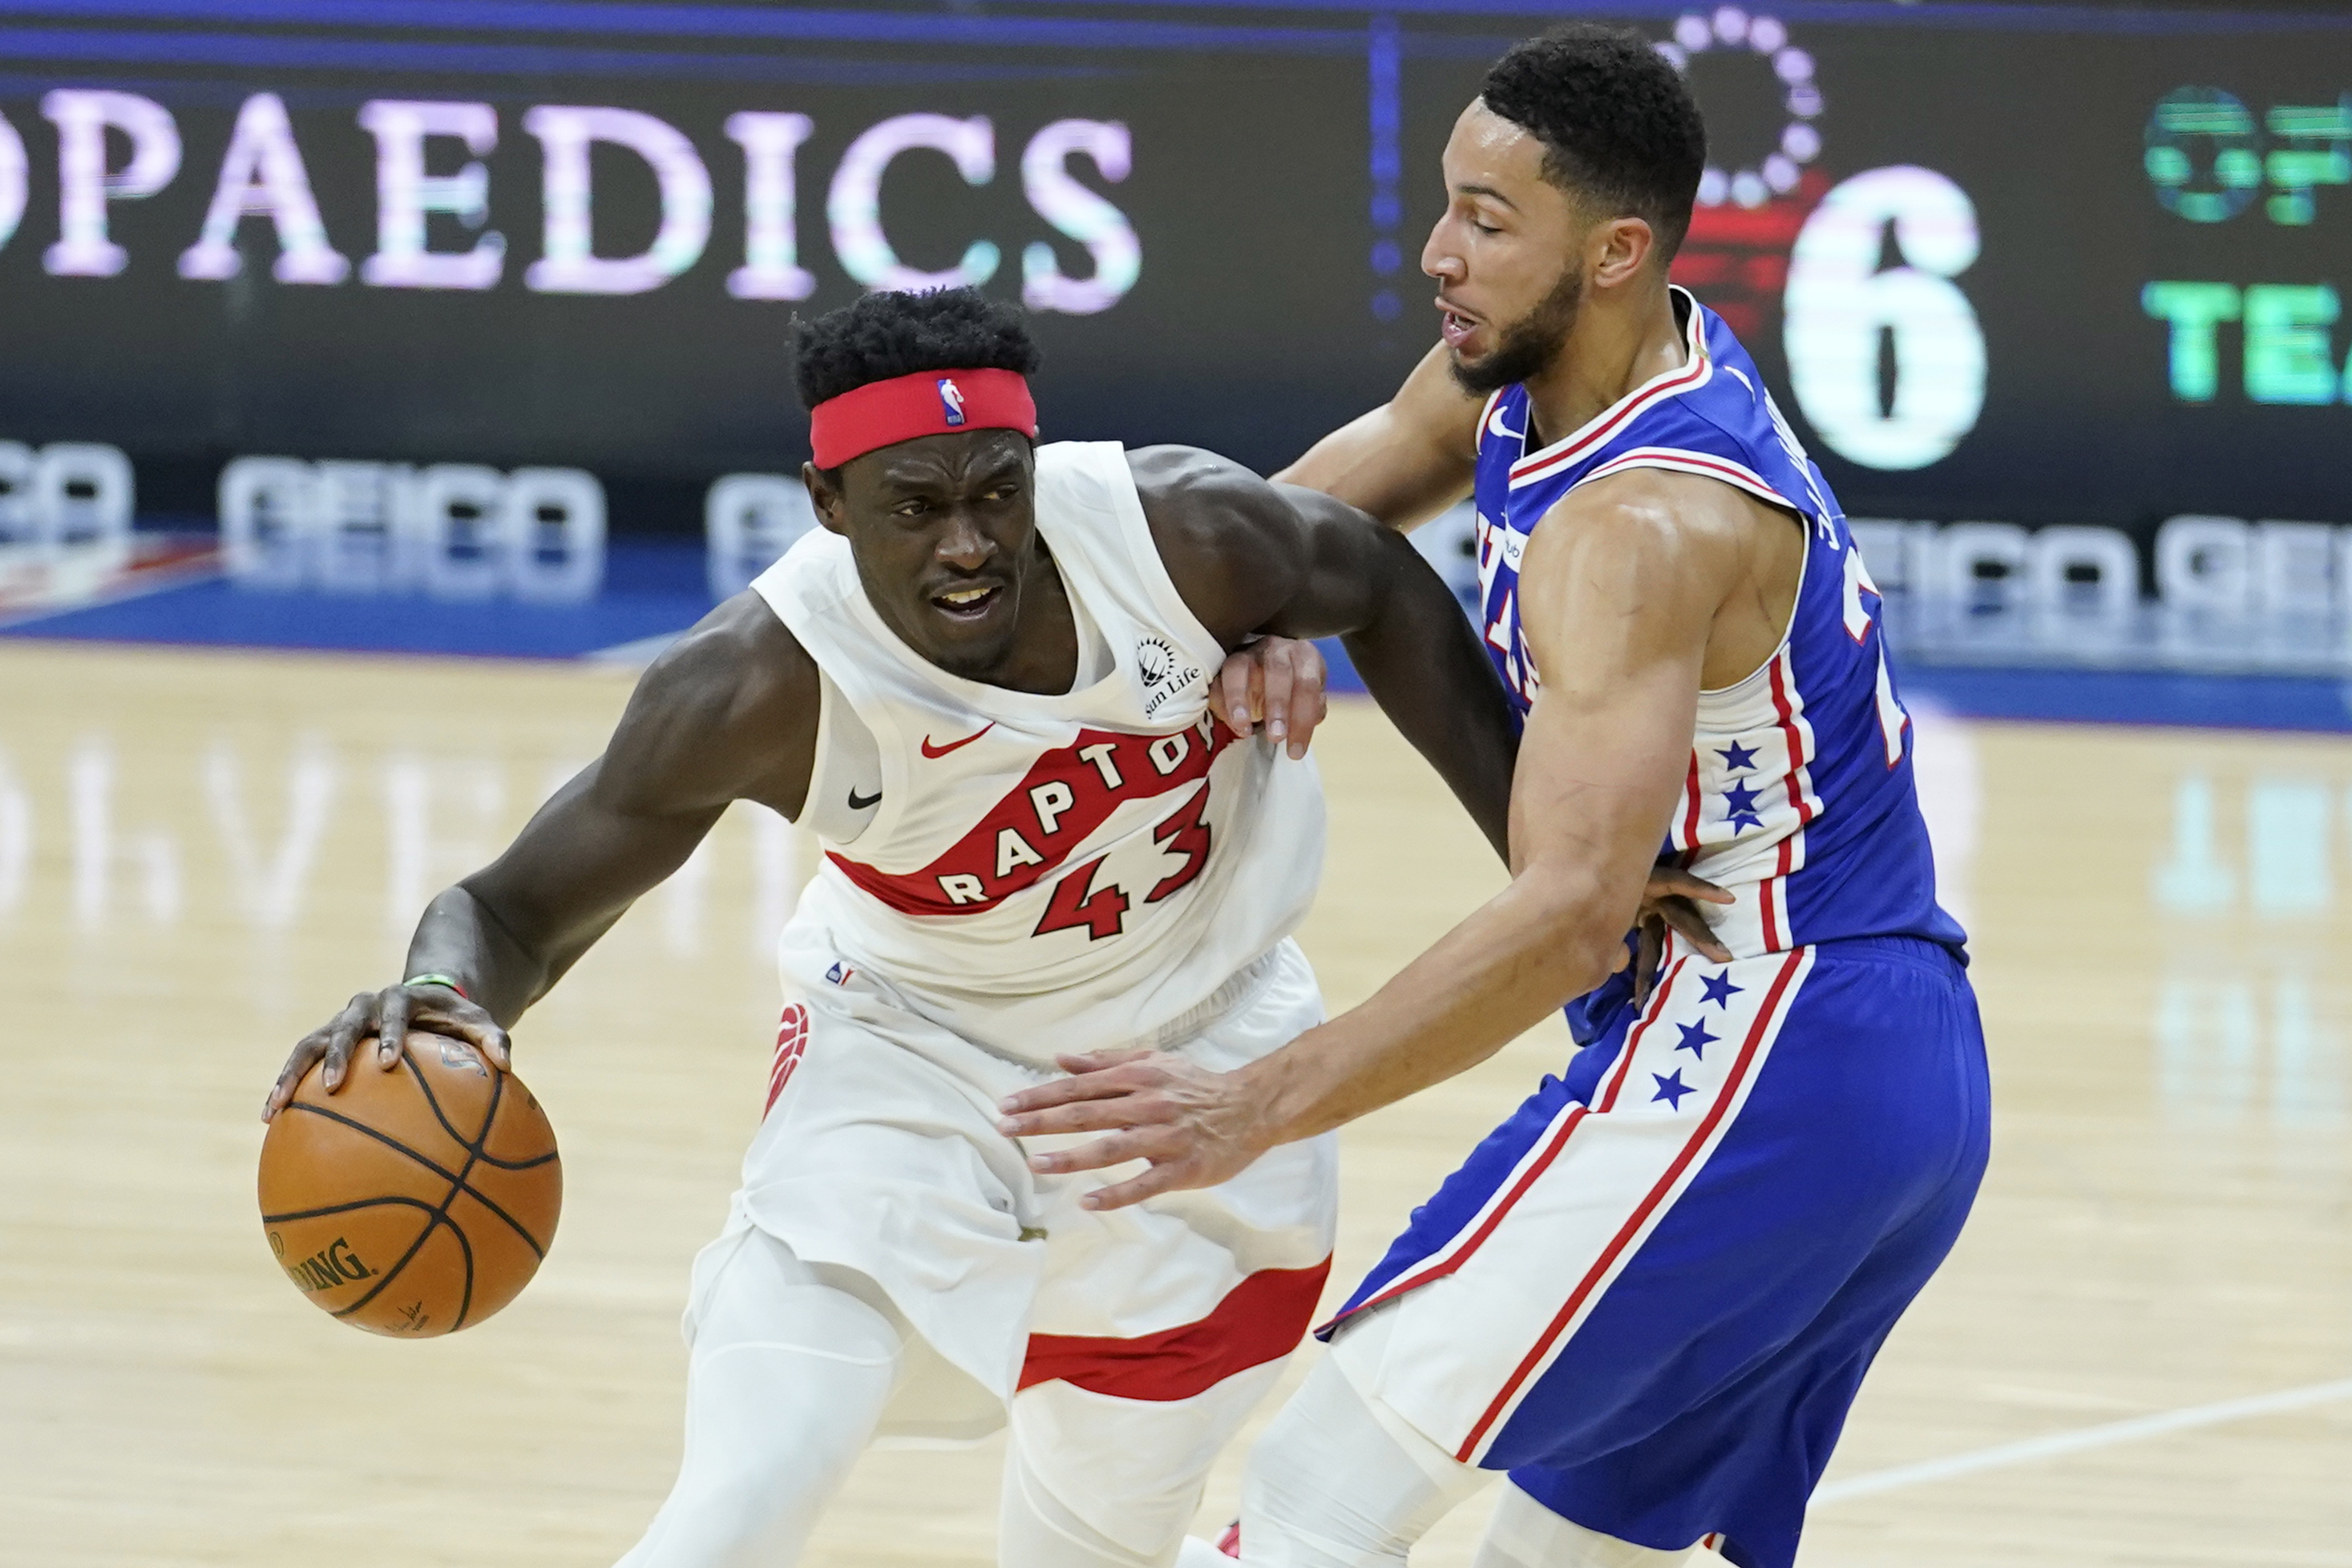 76ers Insiders: Summer Sixers  One-on-One with Rayjon Tucker on